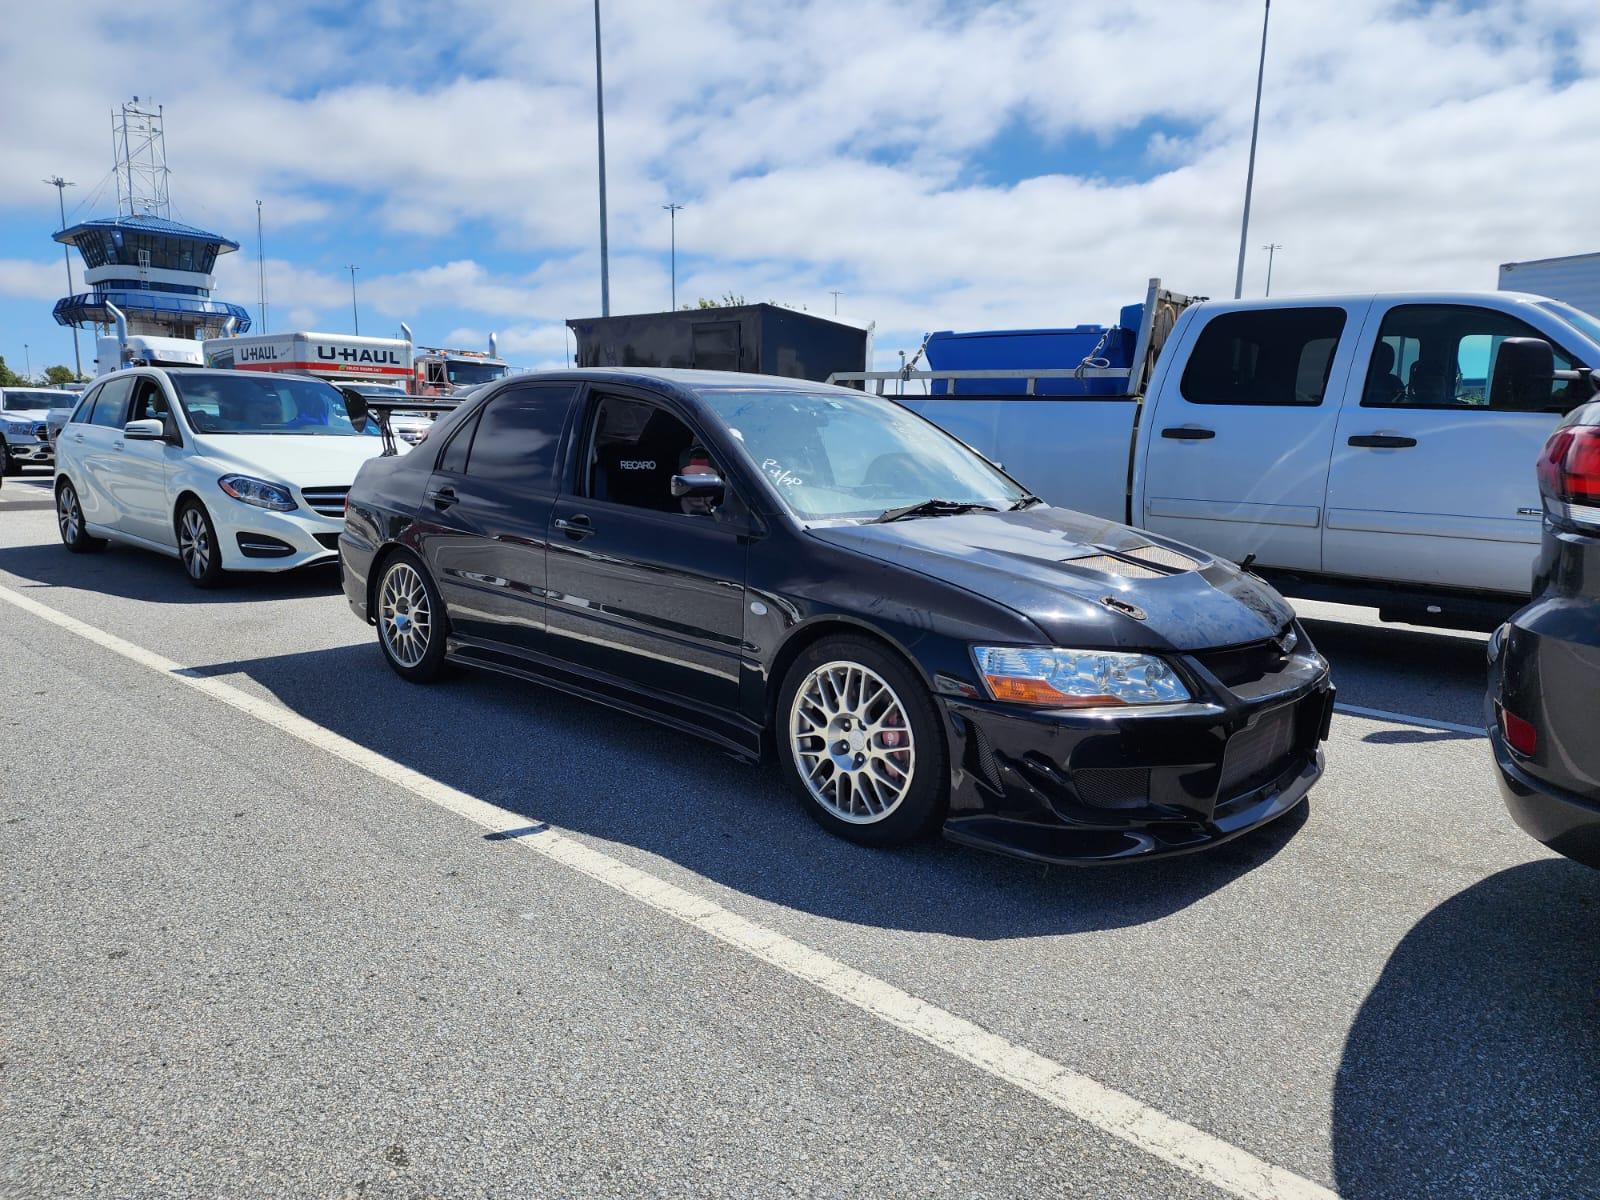 importing-jdm-cars-canada-guide